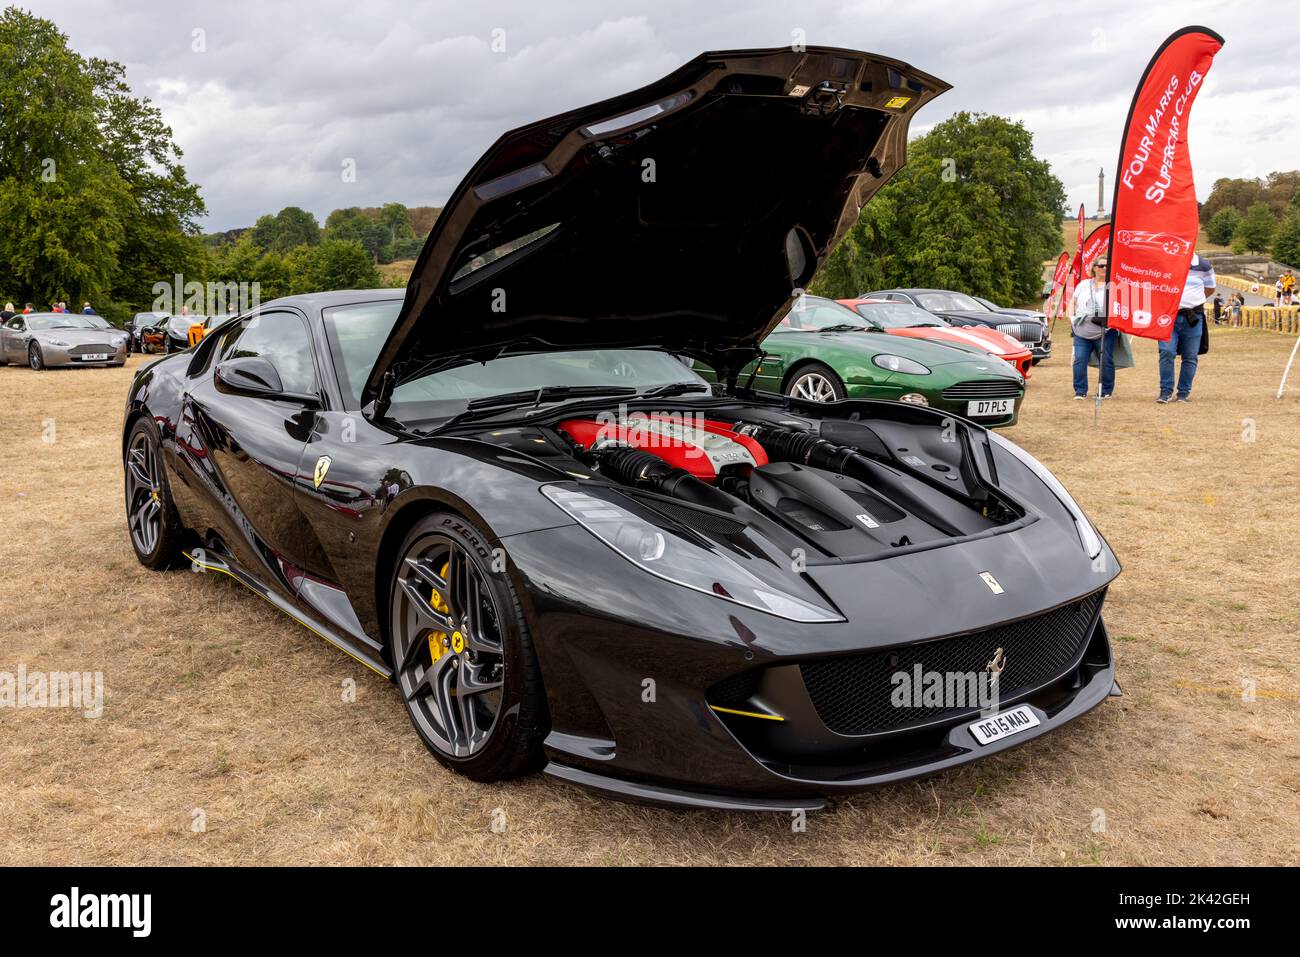 Ferrari 812 Superfast, on display at the Salon Privé Concours d’Elégance motor show held at Blenheim Palace Stock Photo